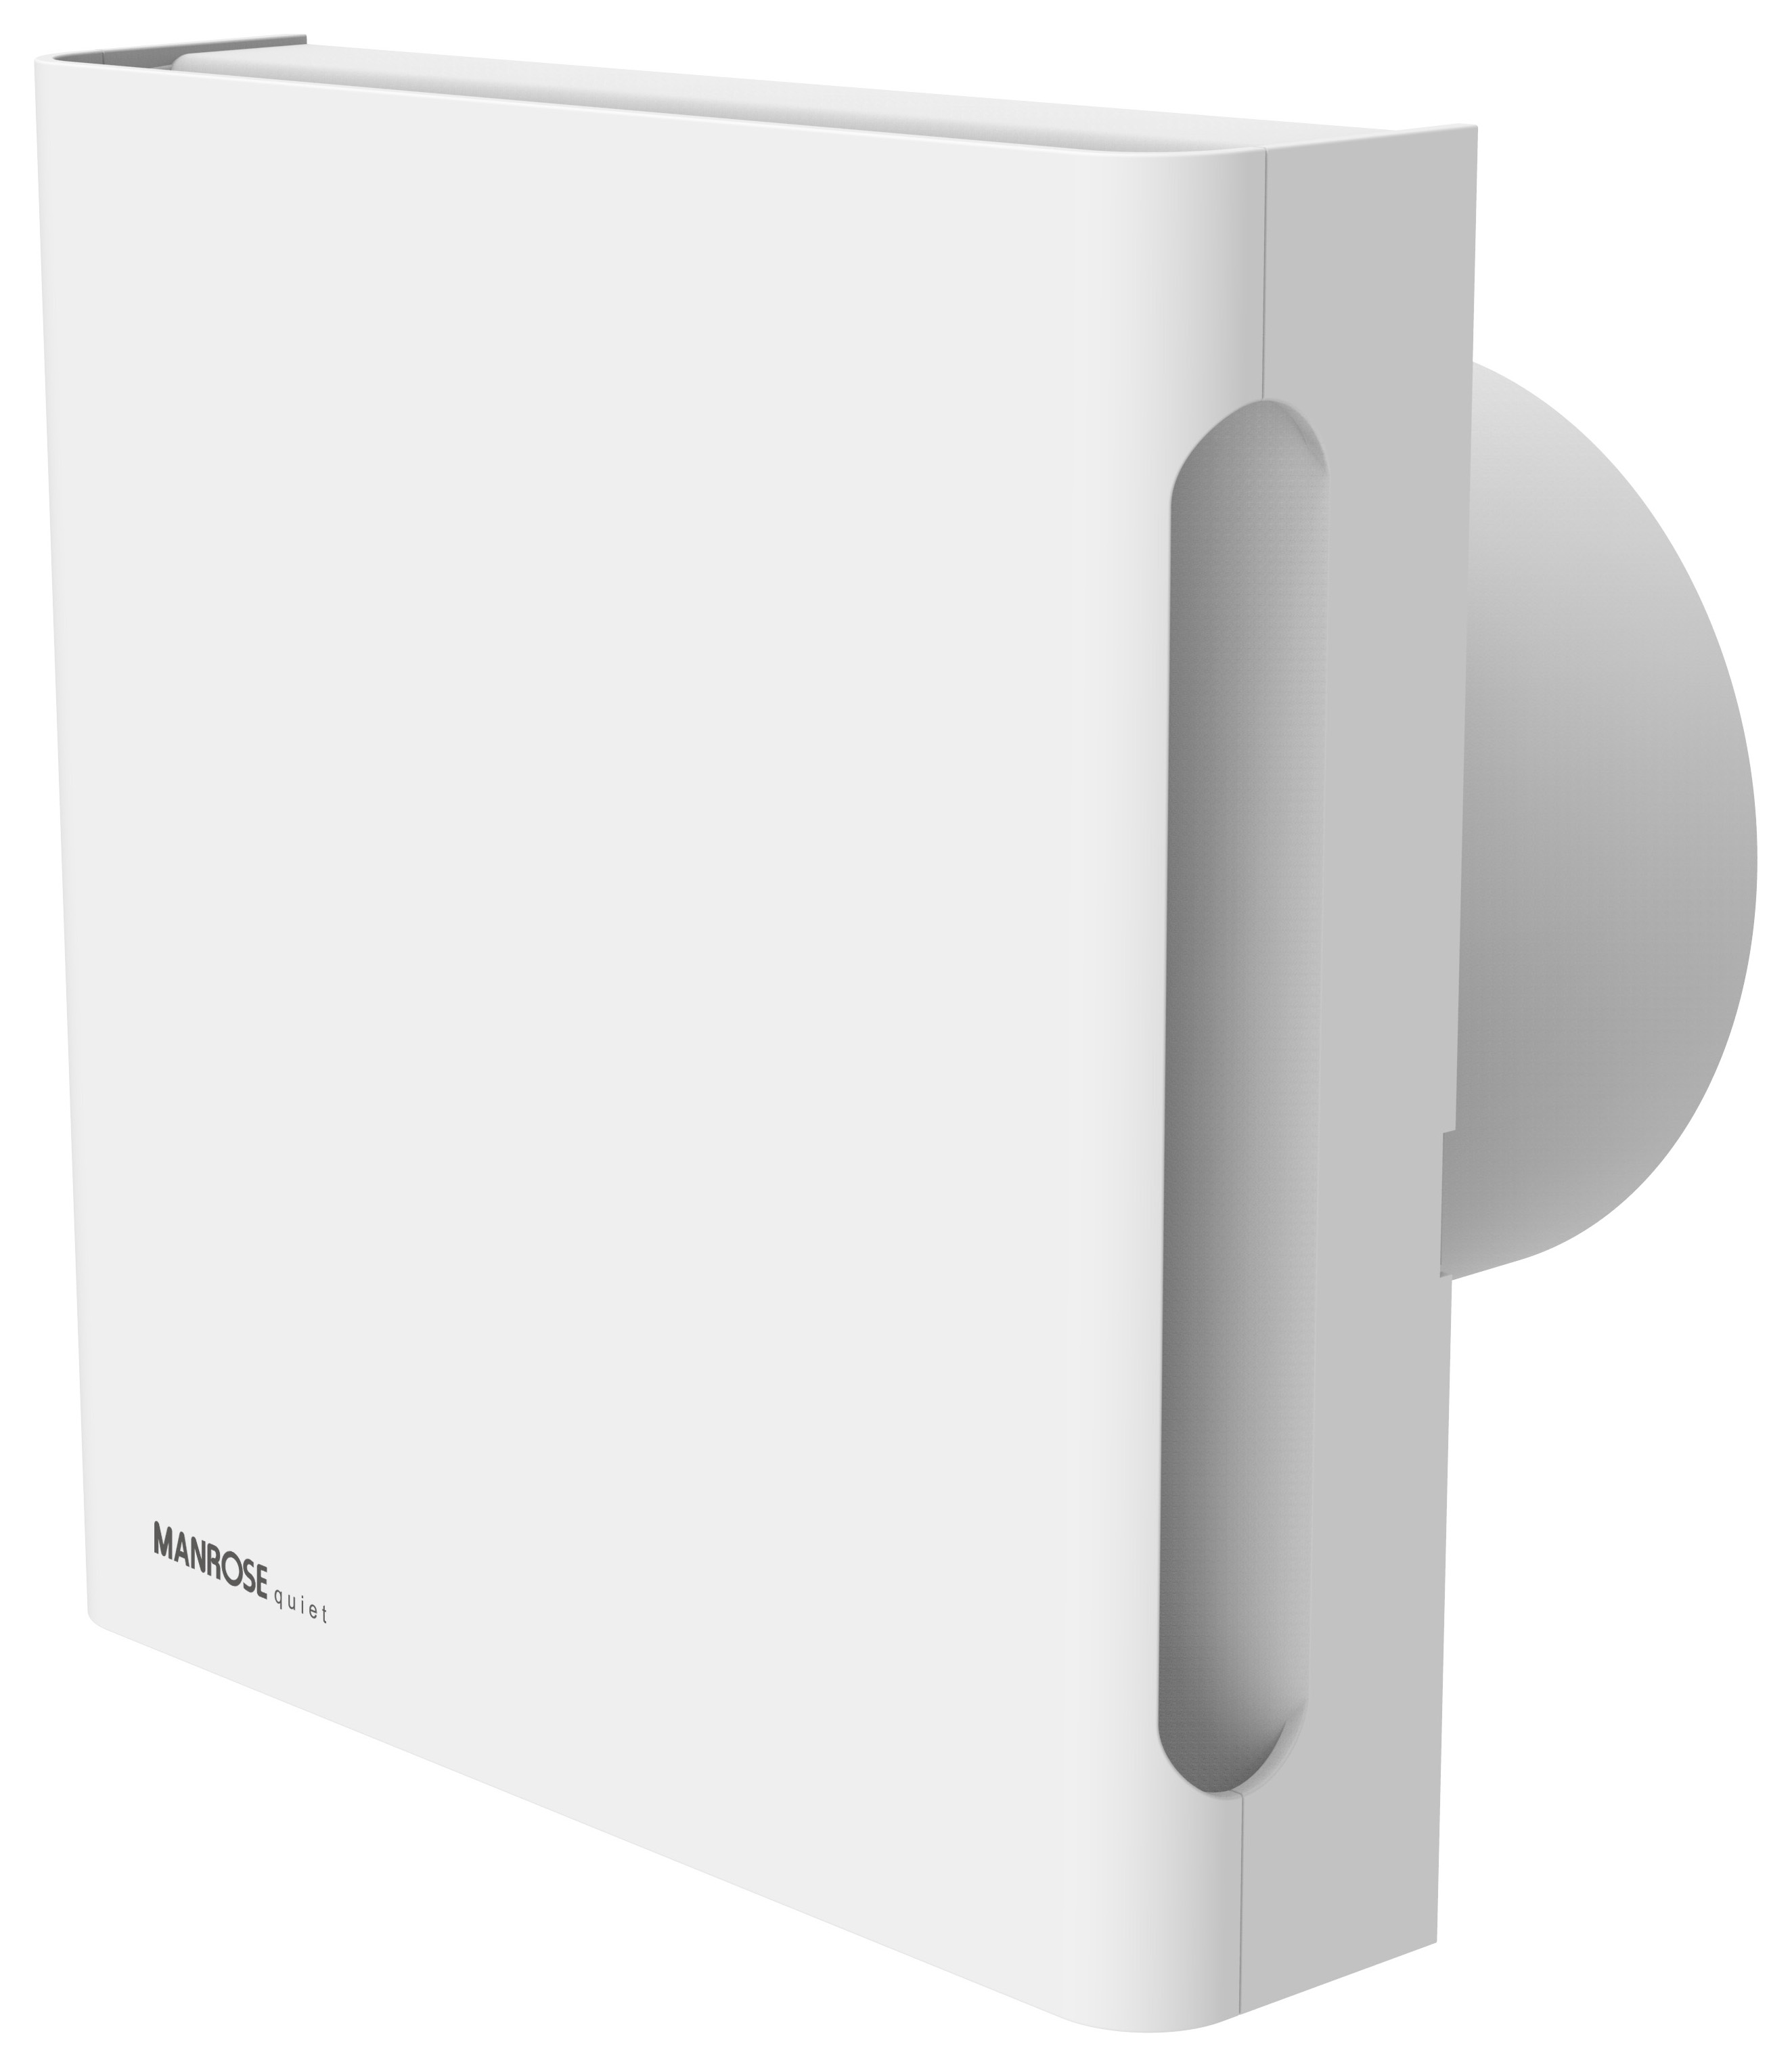 Manrose IPX5 Quiet Bathroom Fan with Timer